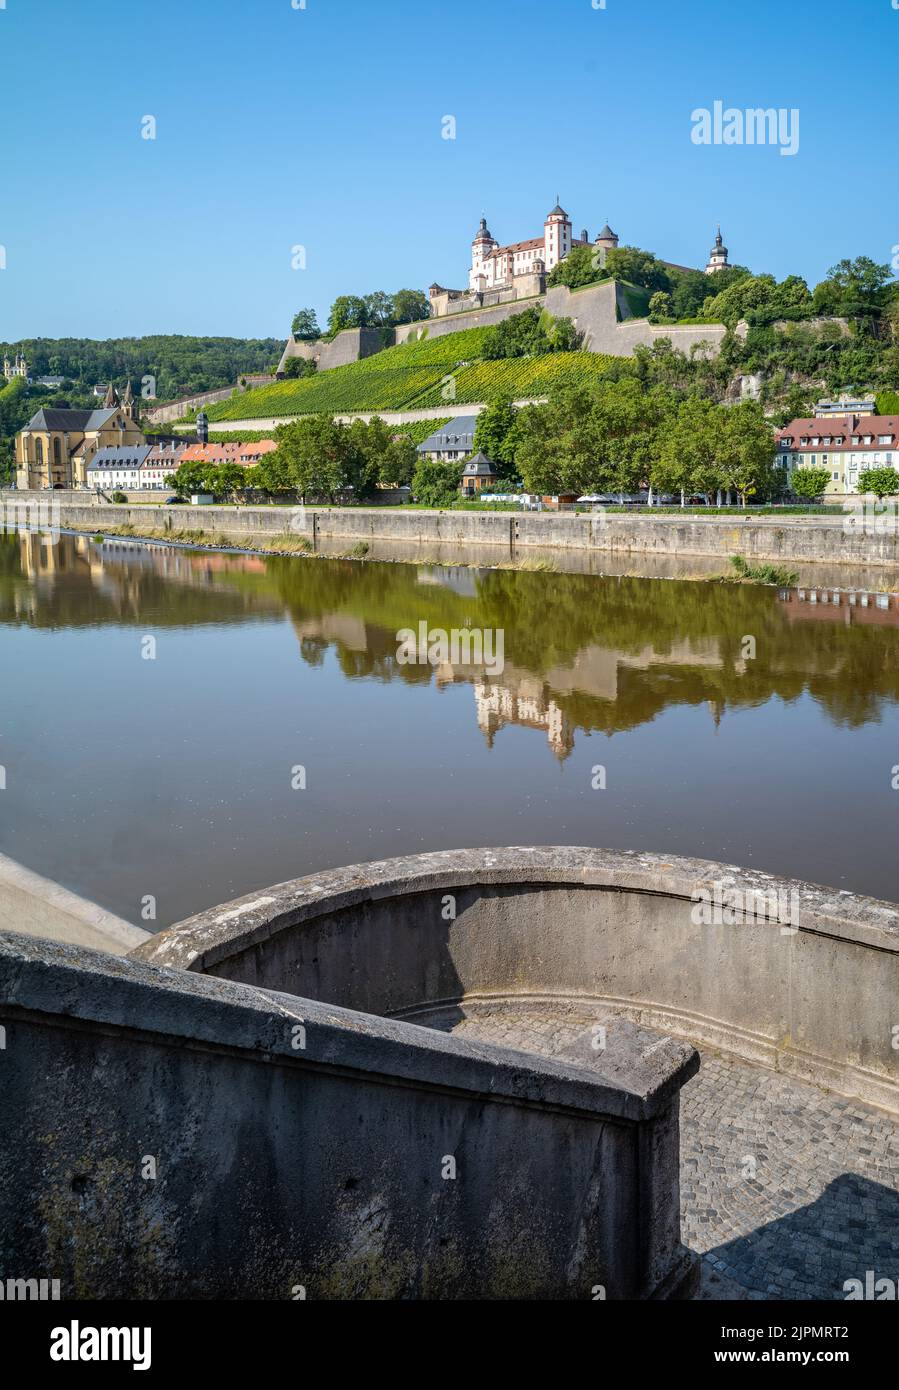 Germany, Wurzburg, the hill with the Marienberg fortress seen from the old Main Bridge Stock Photo